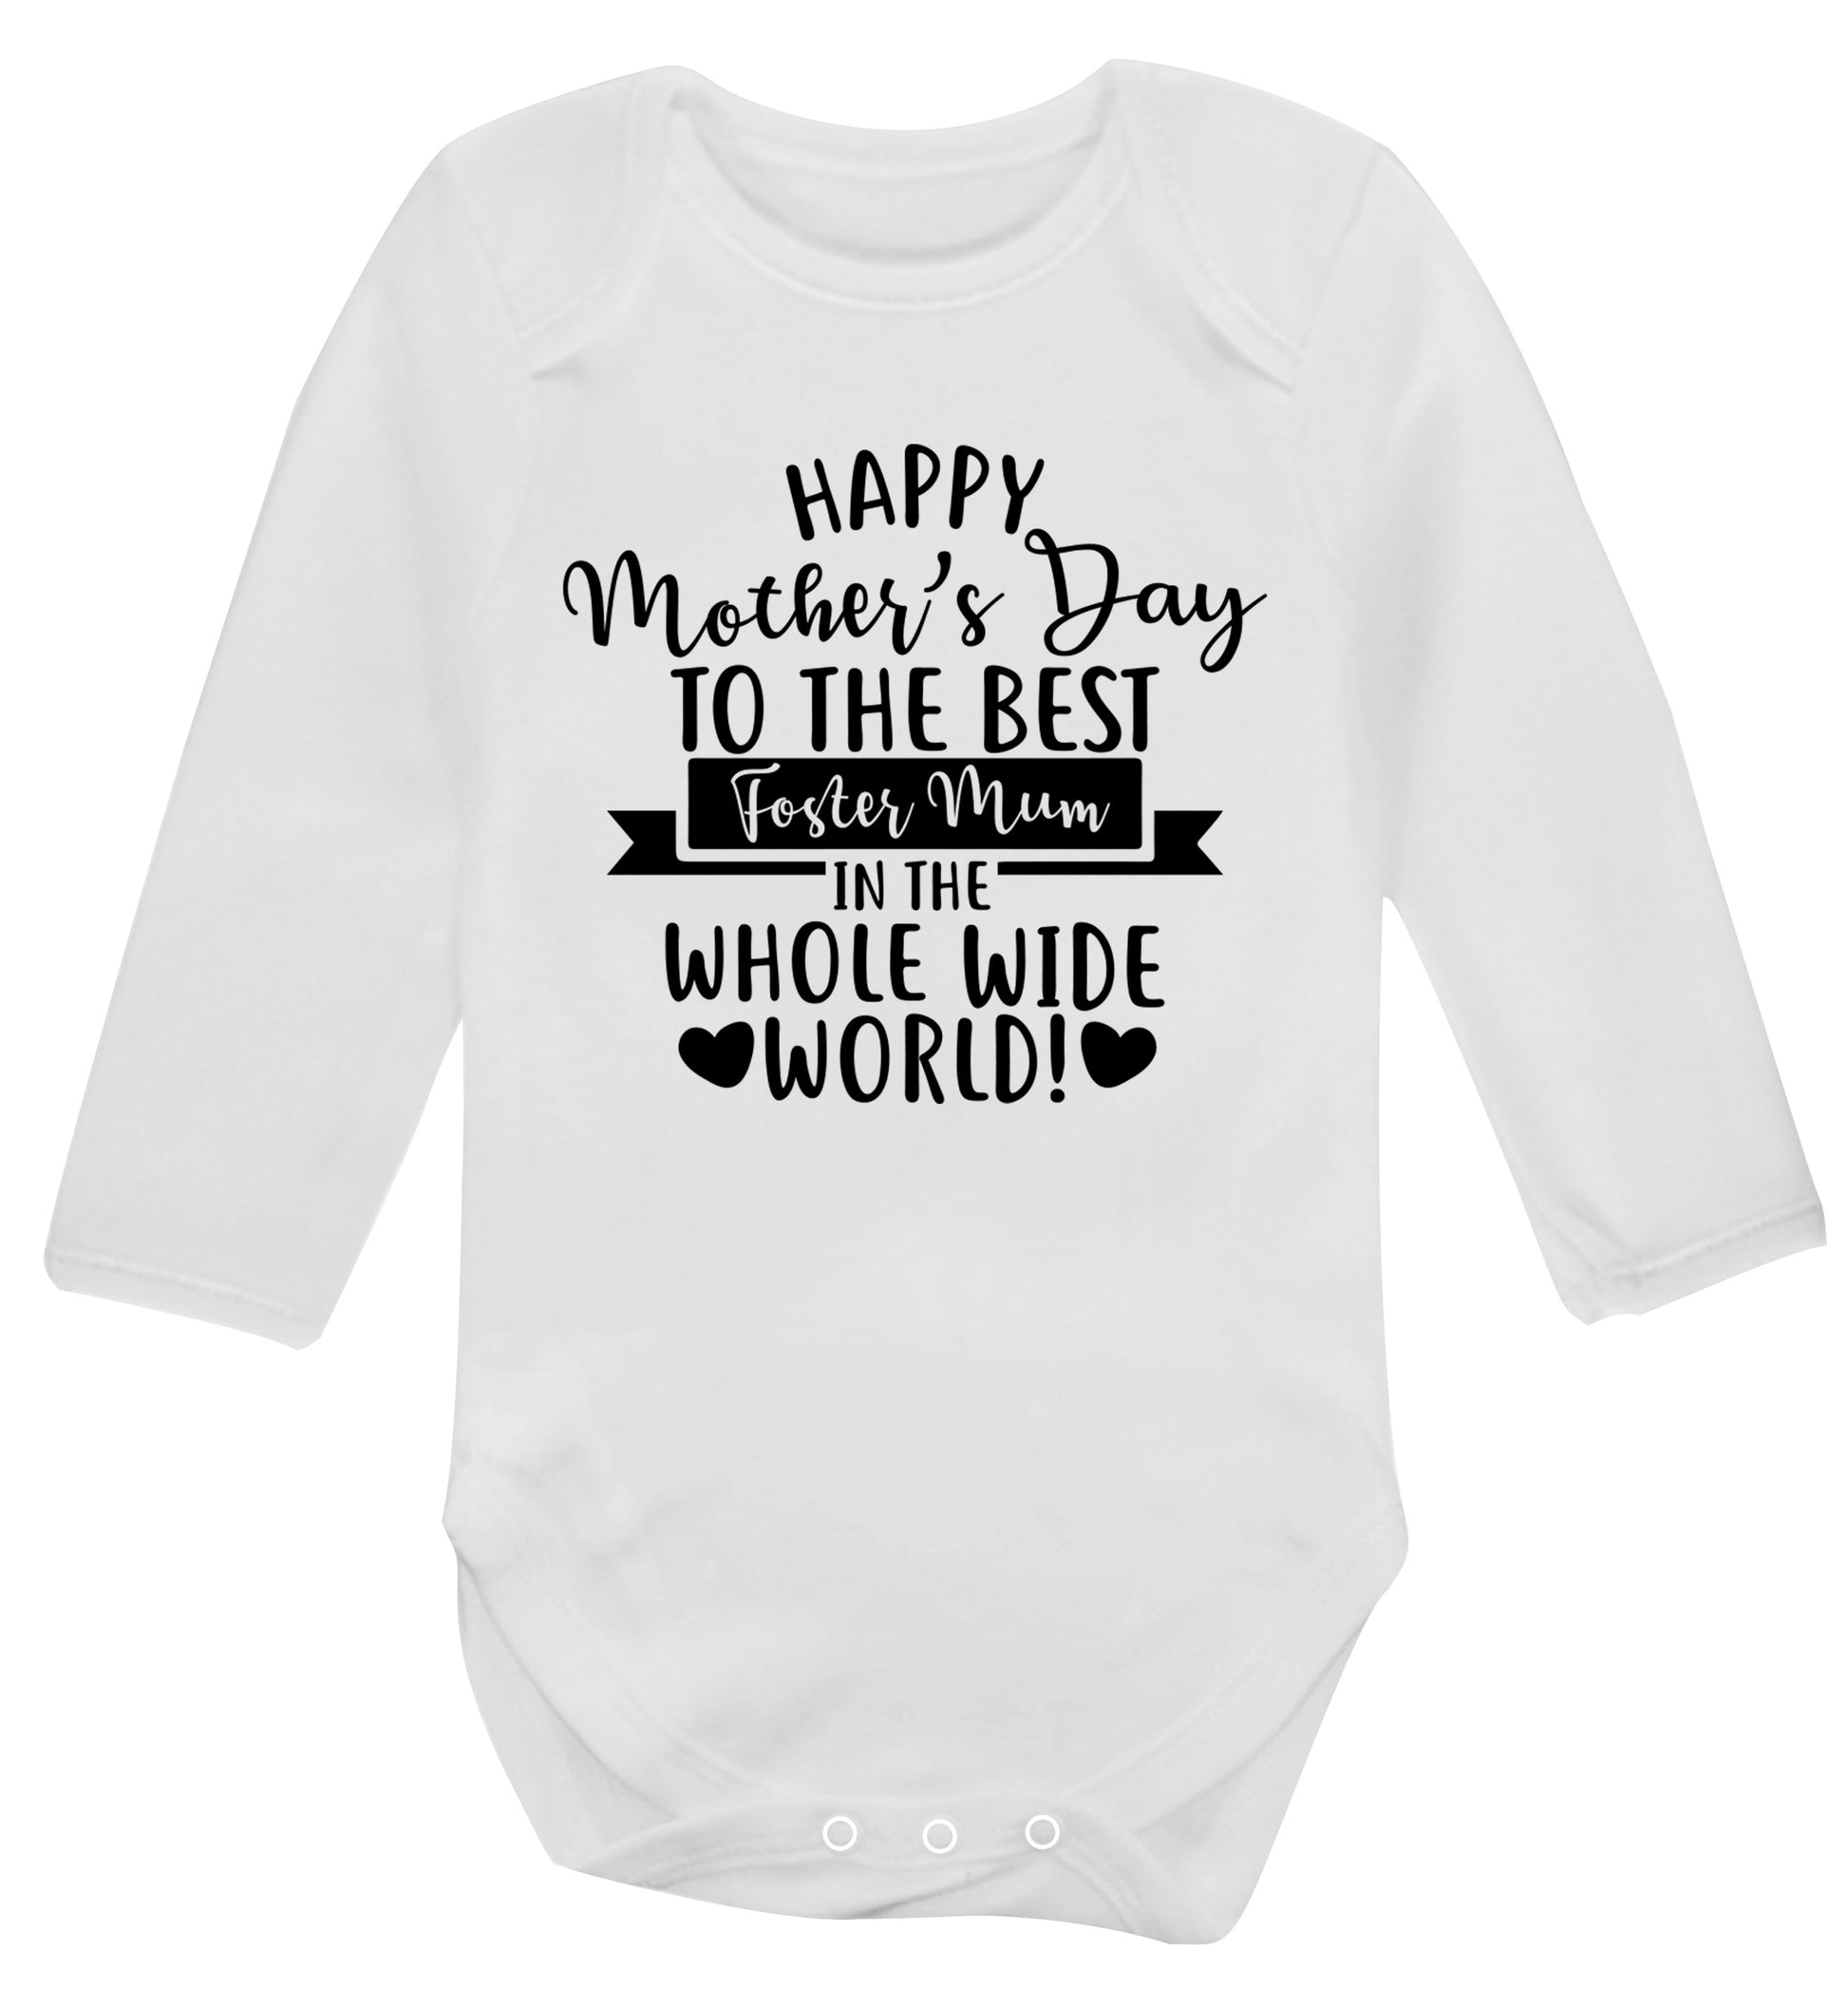 Happy mother's day to the best foster mum in the world Baby Vest long sleeved white 6-12 months